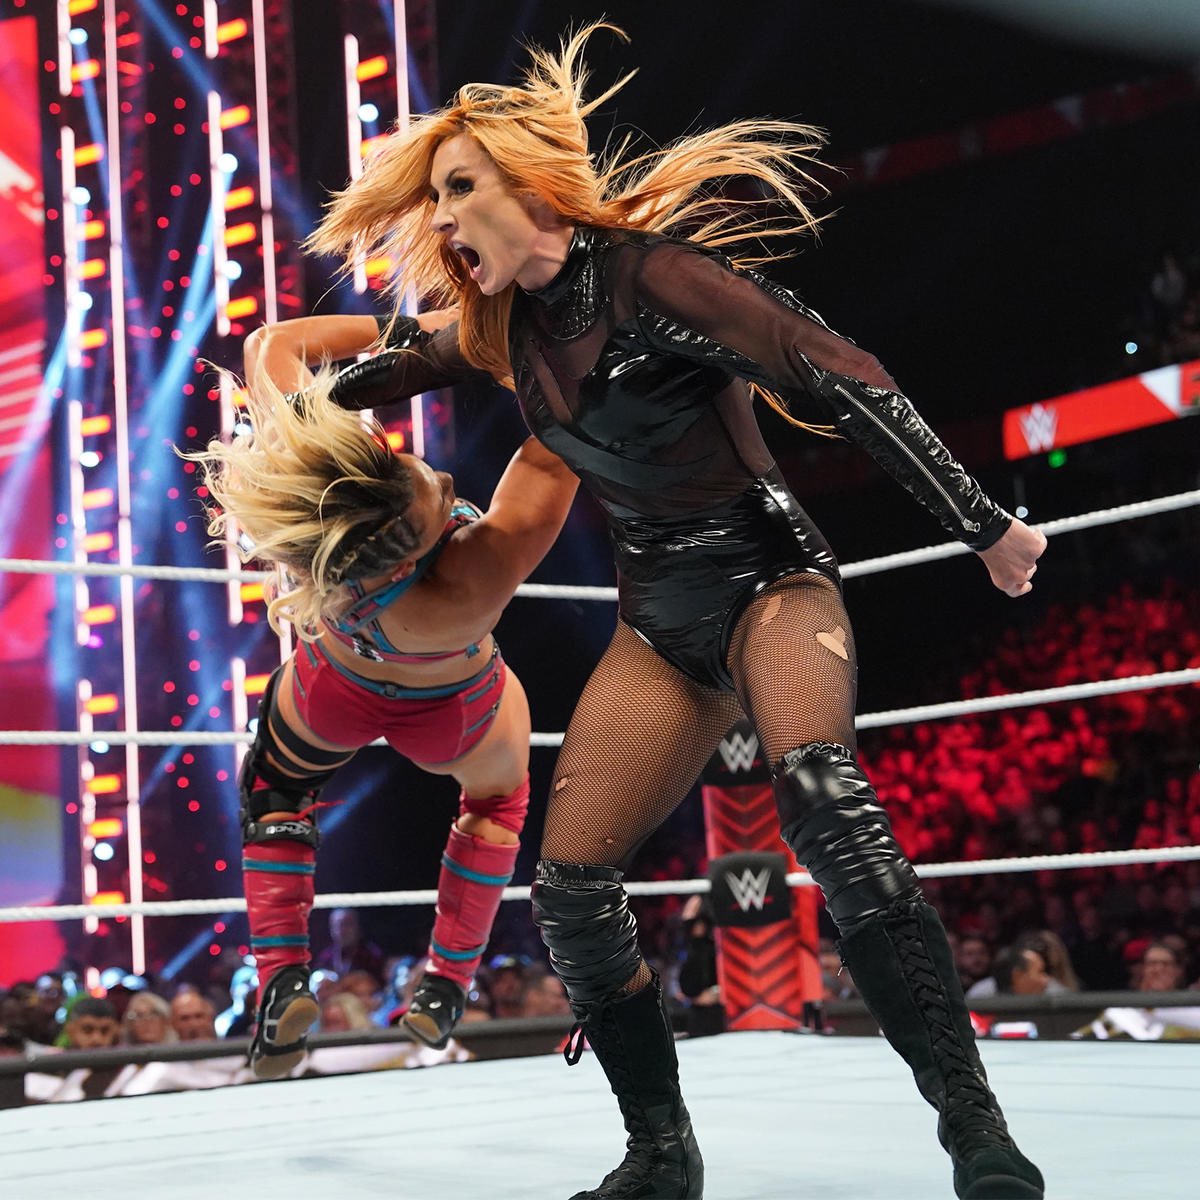 Becky Lynch beat Zoey Stark to earn a rematch against Trish Stratus, LFG! 

This feud has been great, I can’t wait for their rematch, hopefully at SummerSlam! 

@BeckyLynchWWE 
@trishstratuscom https://t.co/7V9uU7uXCG